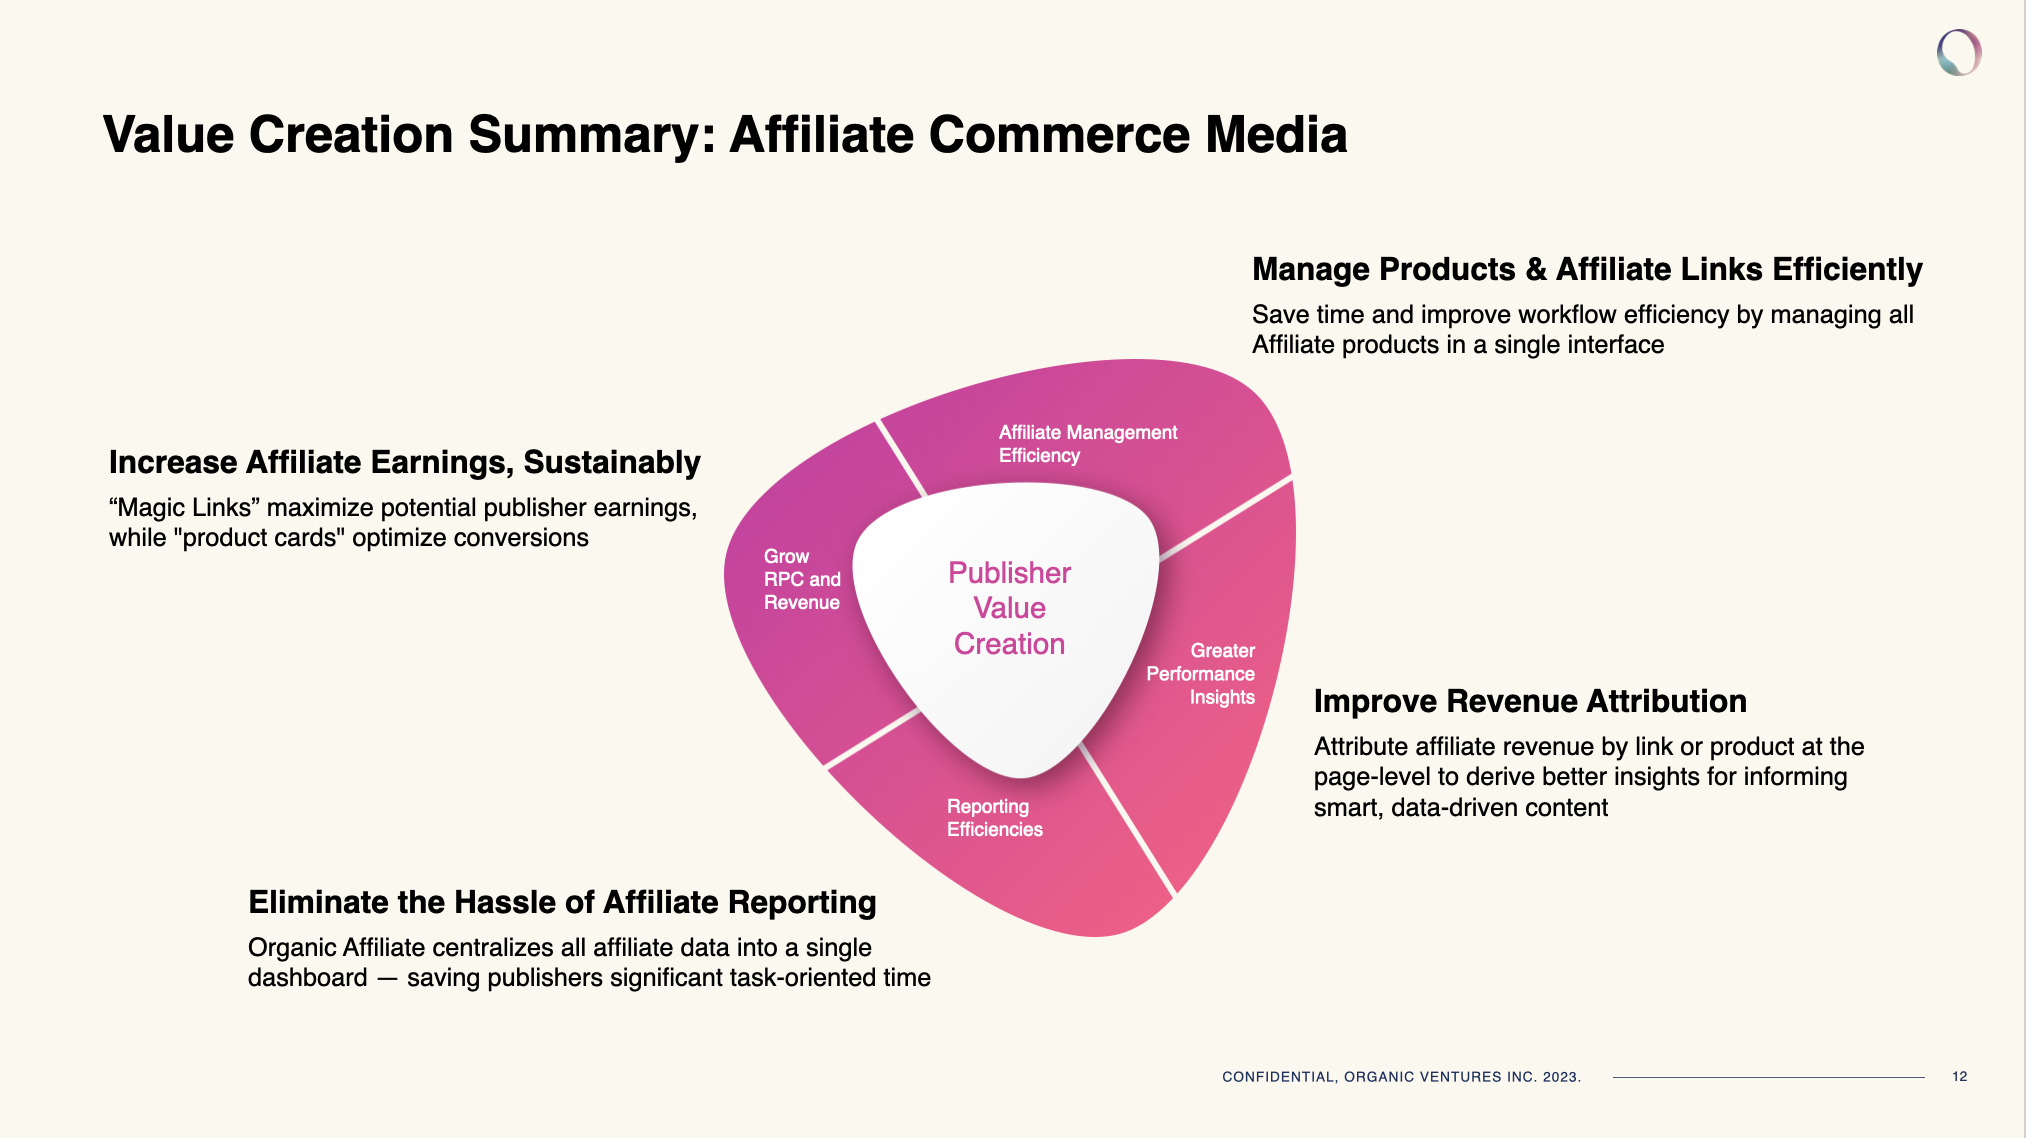 Keep in mind that the solution to making affiliate and commerce media successful for editors and revenue leadership lies in creating human and people connections. Both sides need to feel heard and share in the accountability and benefit of any and all generated success.